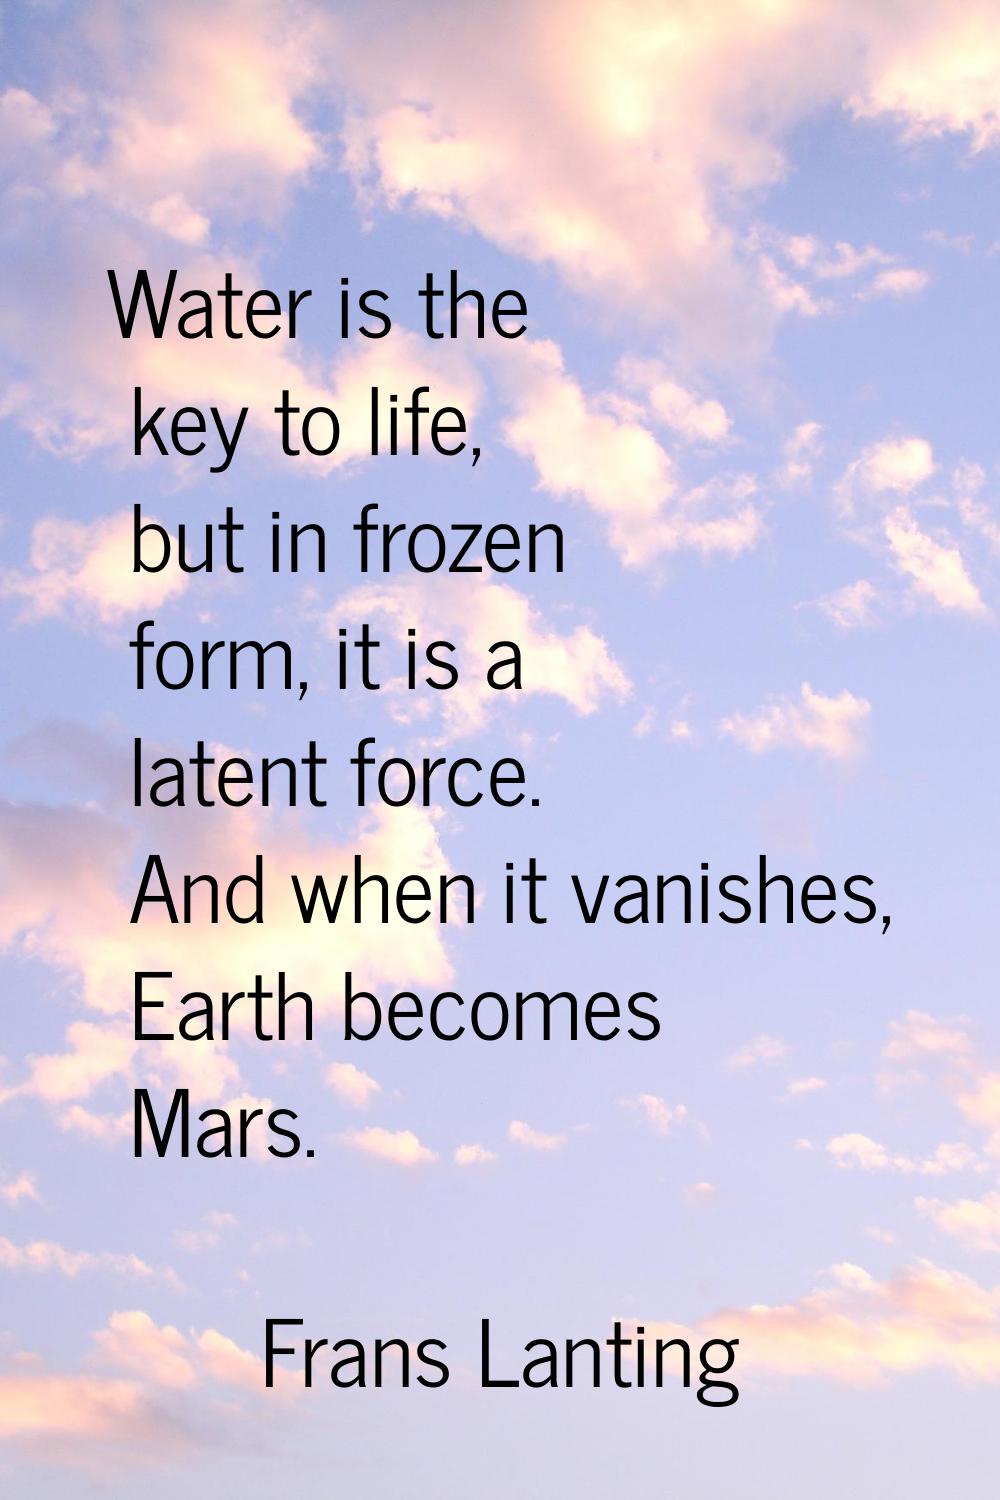 Water is the key to life, but in frozen form, it is a latent force. And when it vanishes, Earth bec